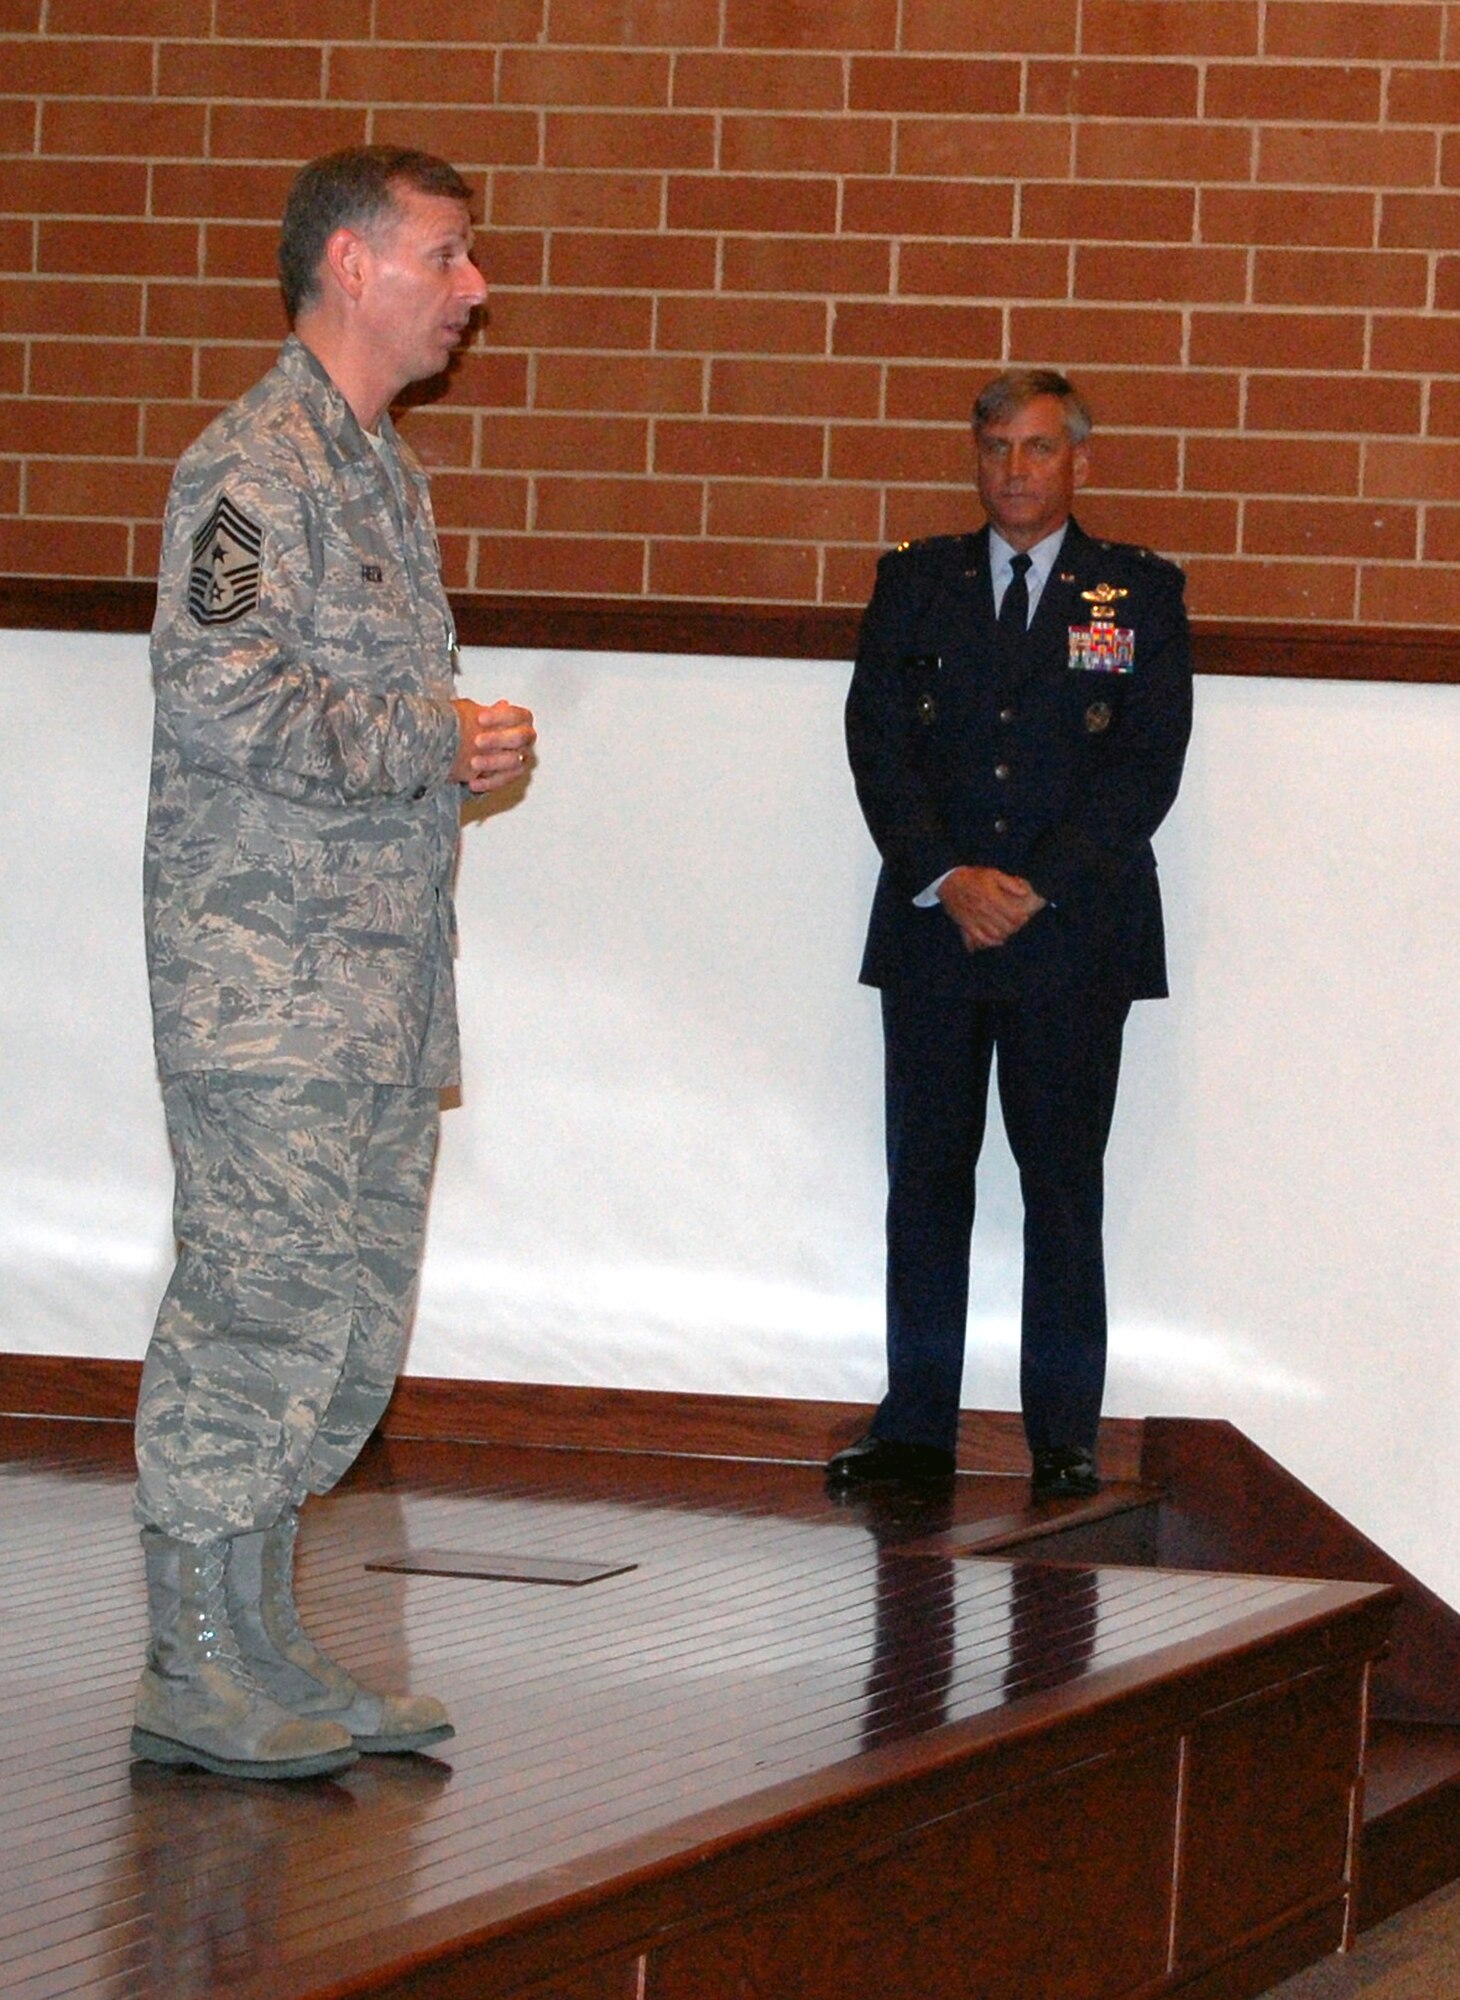 Chief Master Sgt. Jeffry Helm, U.S. Air Force Expeditionary Center's command chief master sergeant from November 2006 to September 2008, bids farewell to the USAF EC "Eagles" during a commander's call Aug. 25, 2008.  Maj. Gen. Kip Self, USAF EC commander, looks on.  Chief Helm moves on to become the command chief for the Army and Air Force Exchange Service in Dallas, Texas.  (U.S. Air Force Photo/Tech. Sgt. Scott T. Sturkol)